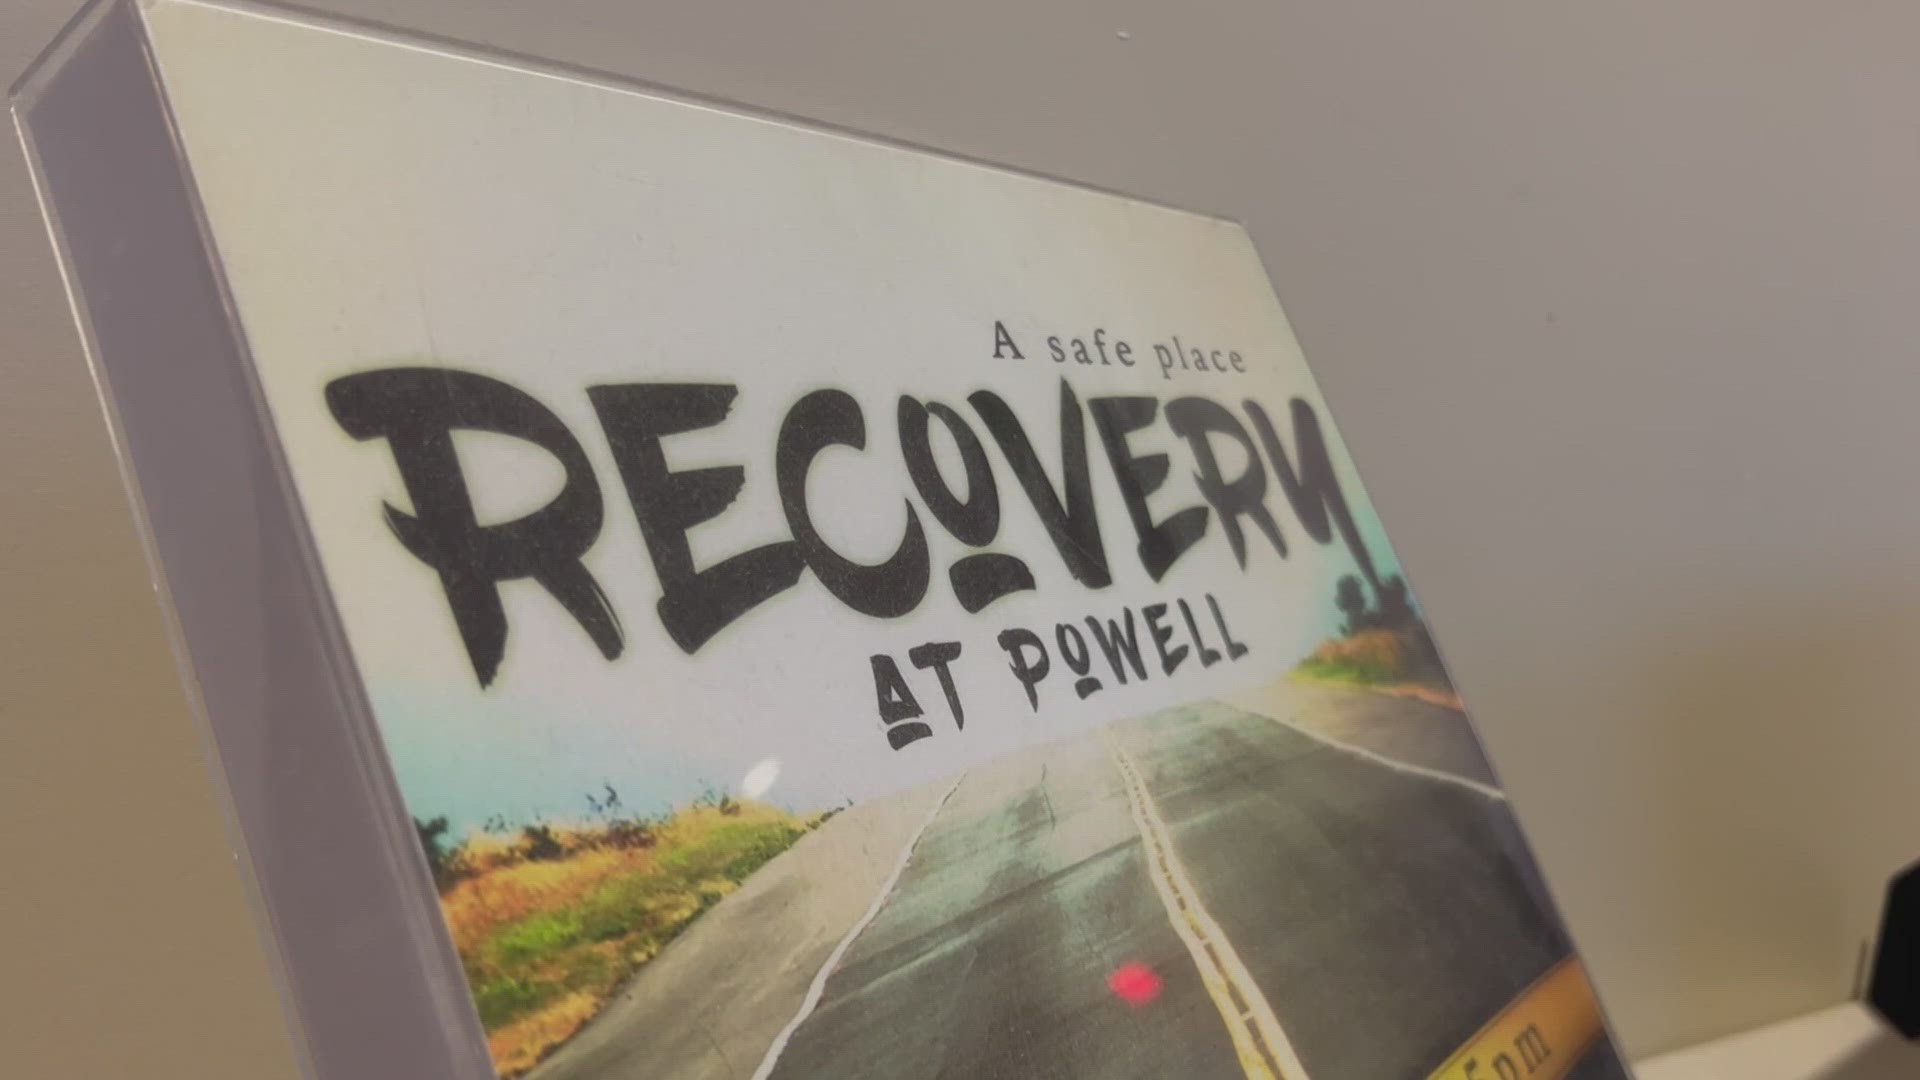 The program, "Recovery at Powell," ranges between providing spiritual support and treating the root causes of addiction like grief or co-dependency.